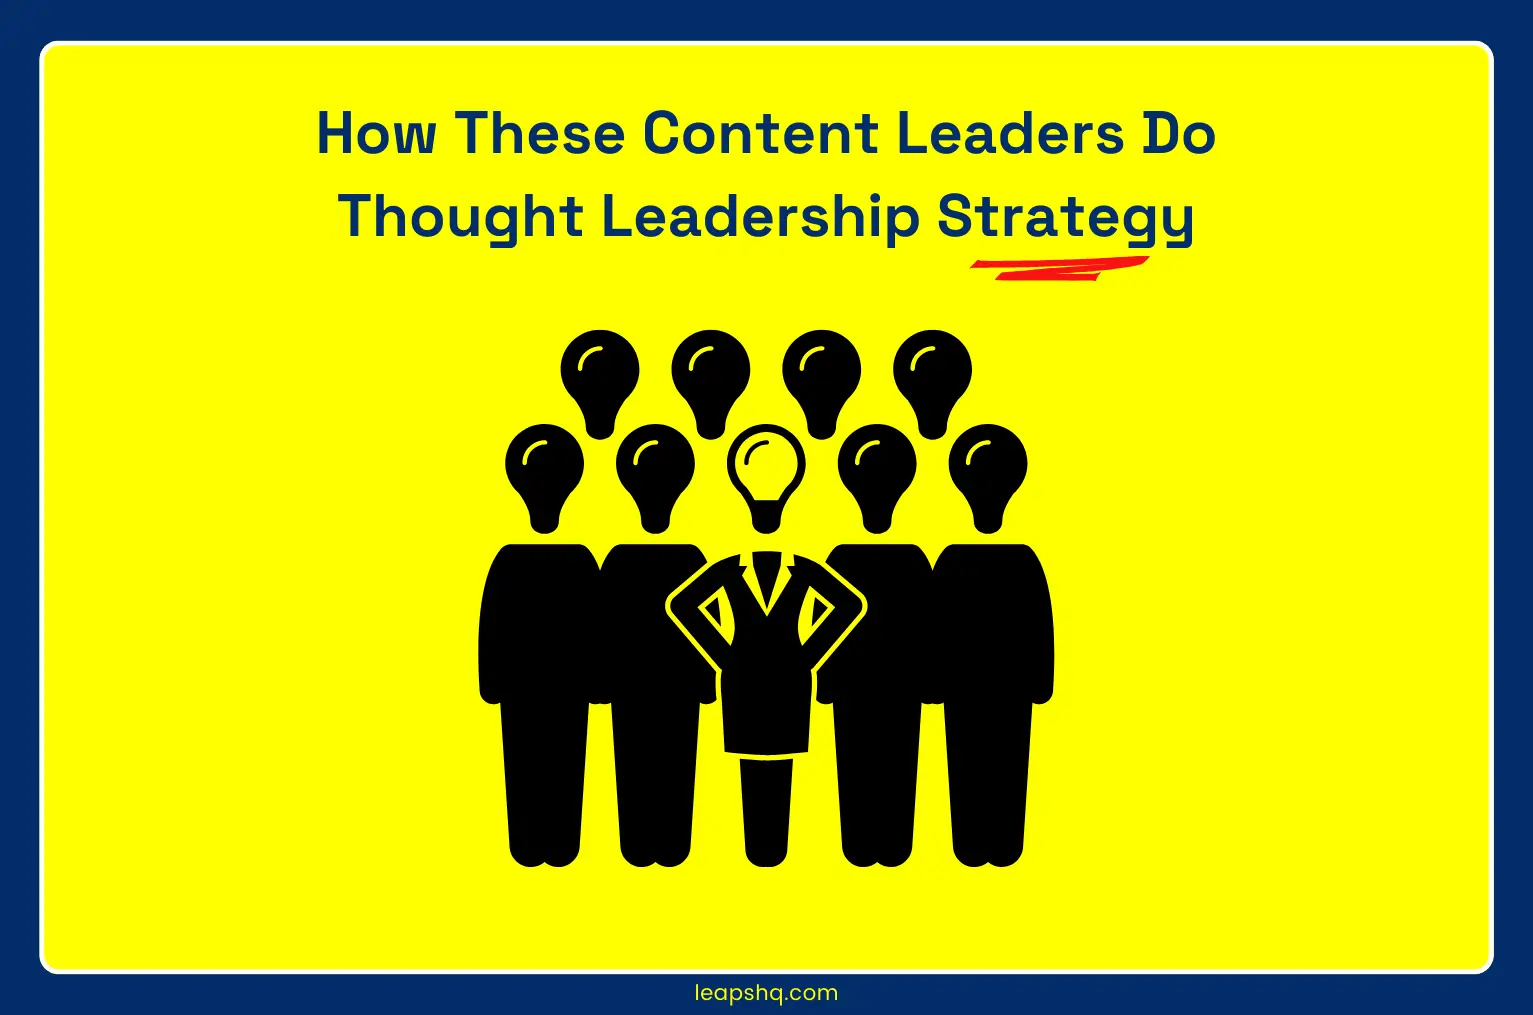 How These Content Leaders Do Thought Leadership Strategy